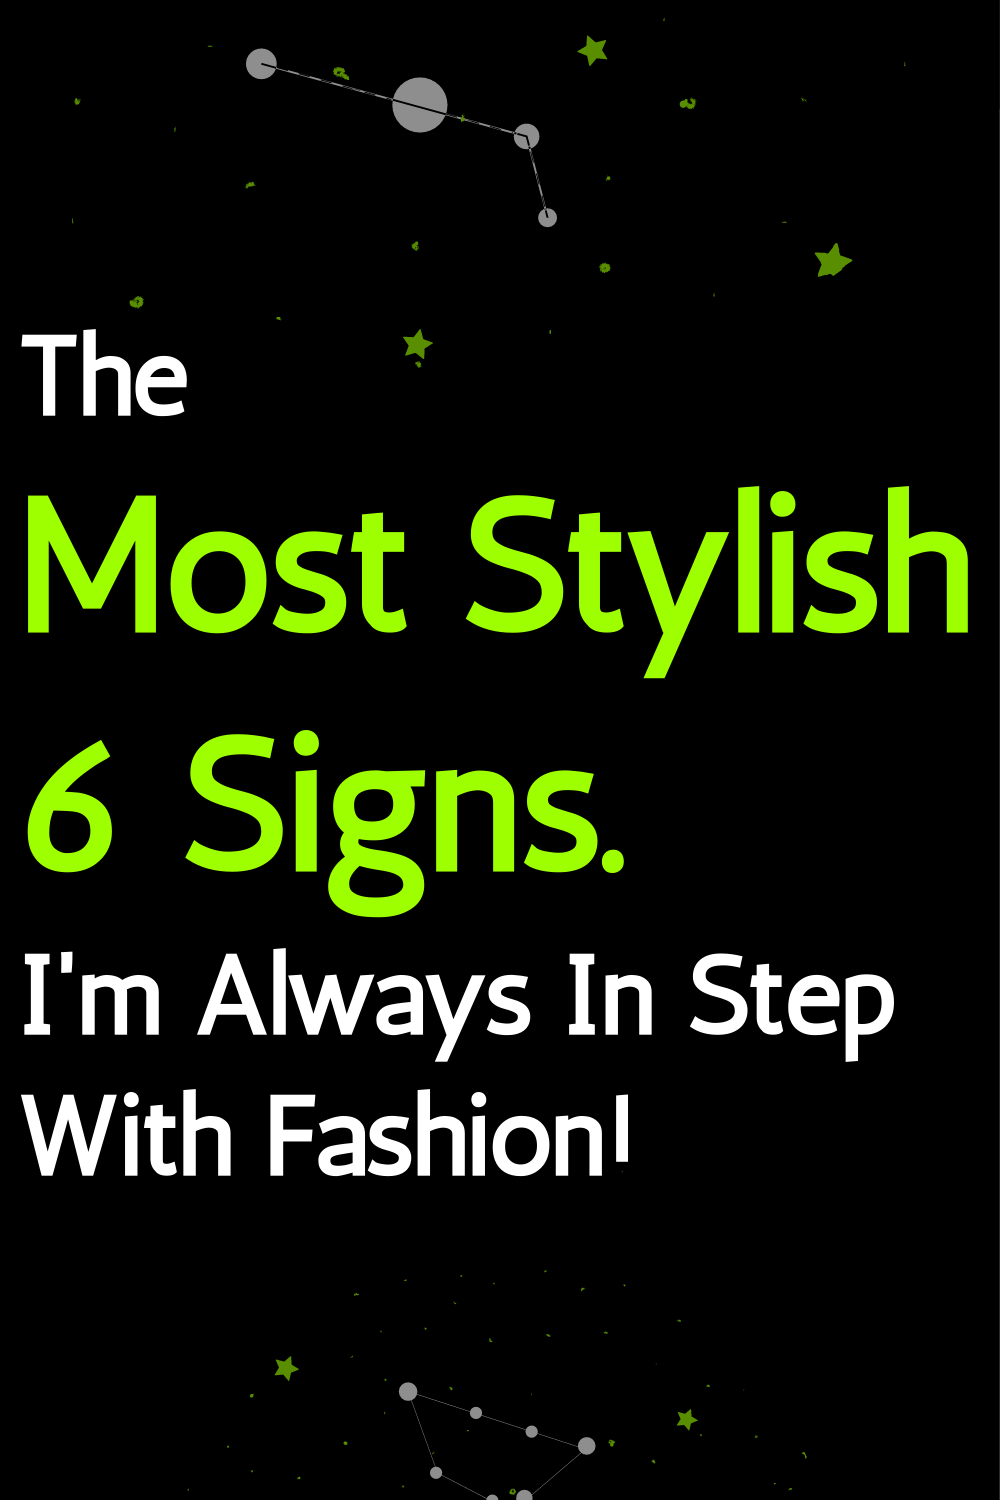 The Most Stylish 6 Signs. I'm Always In Step With Fashion!